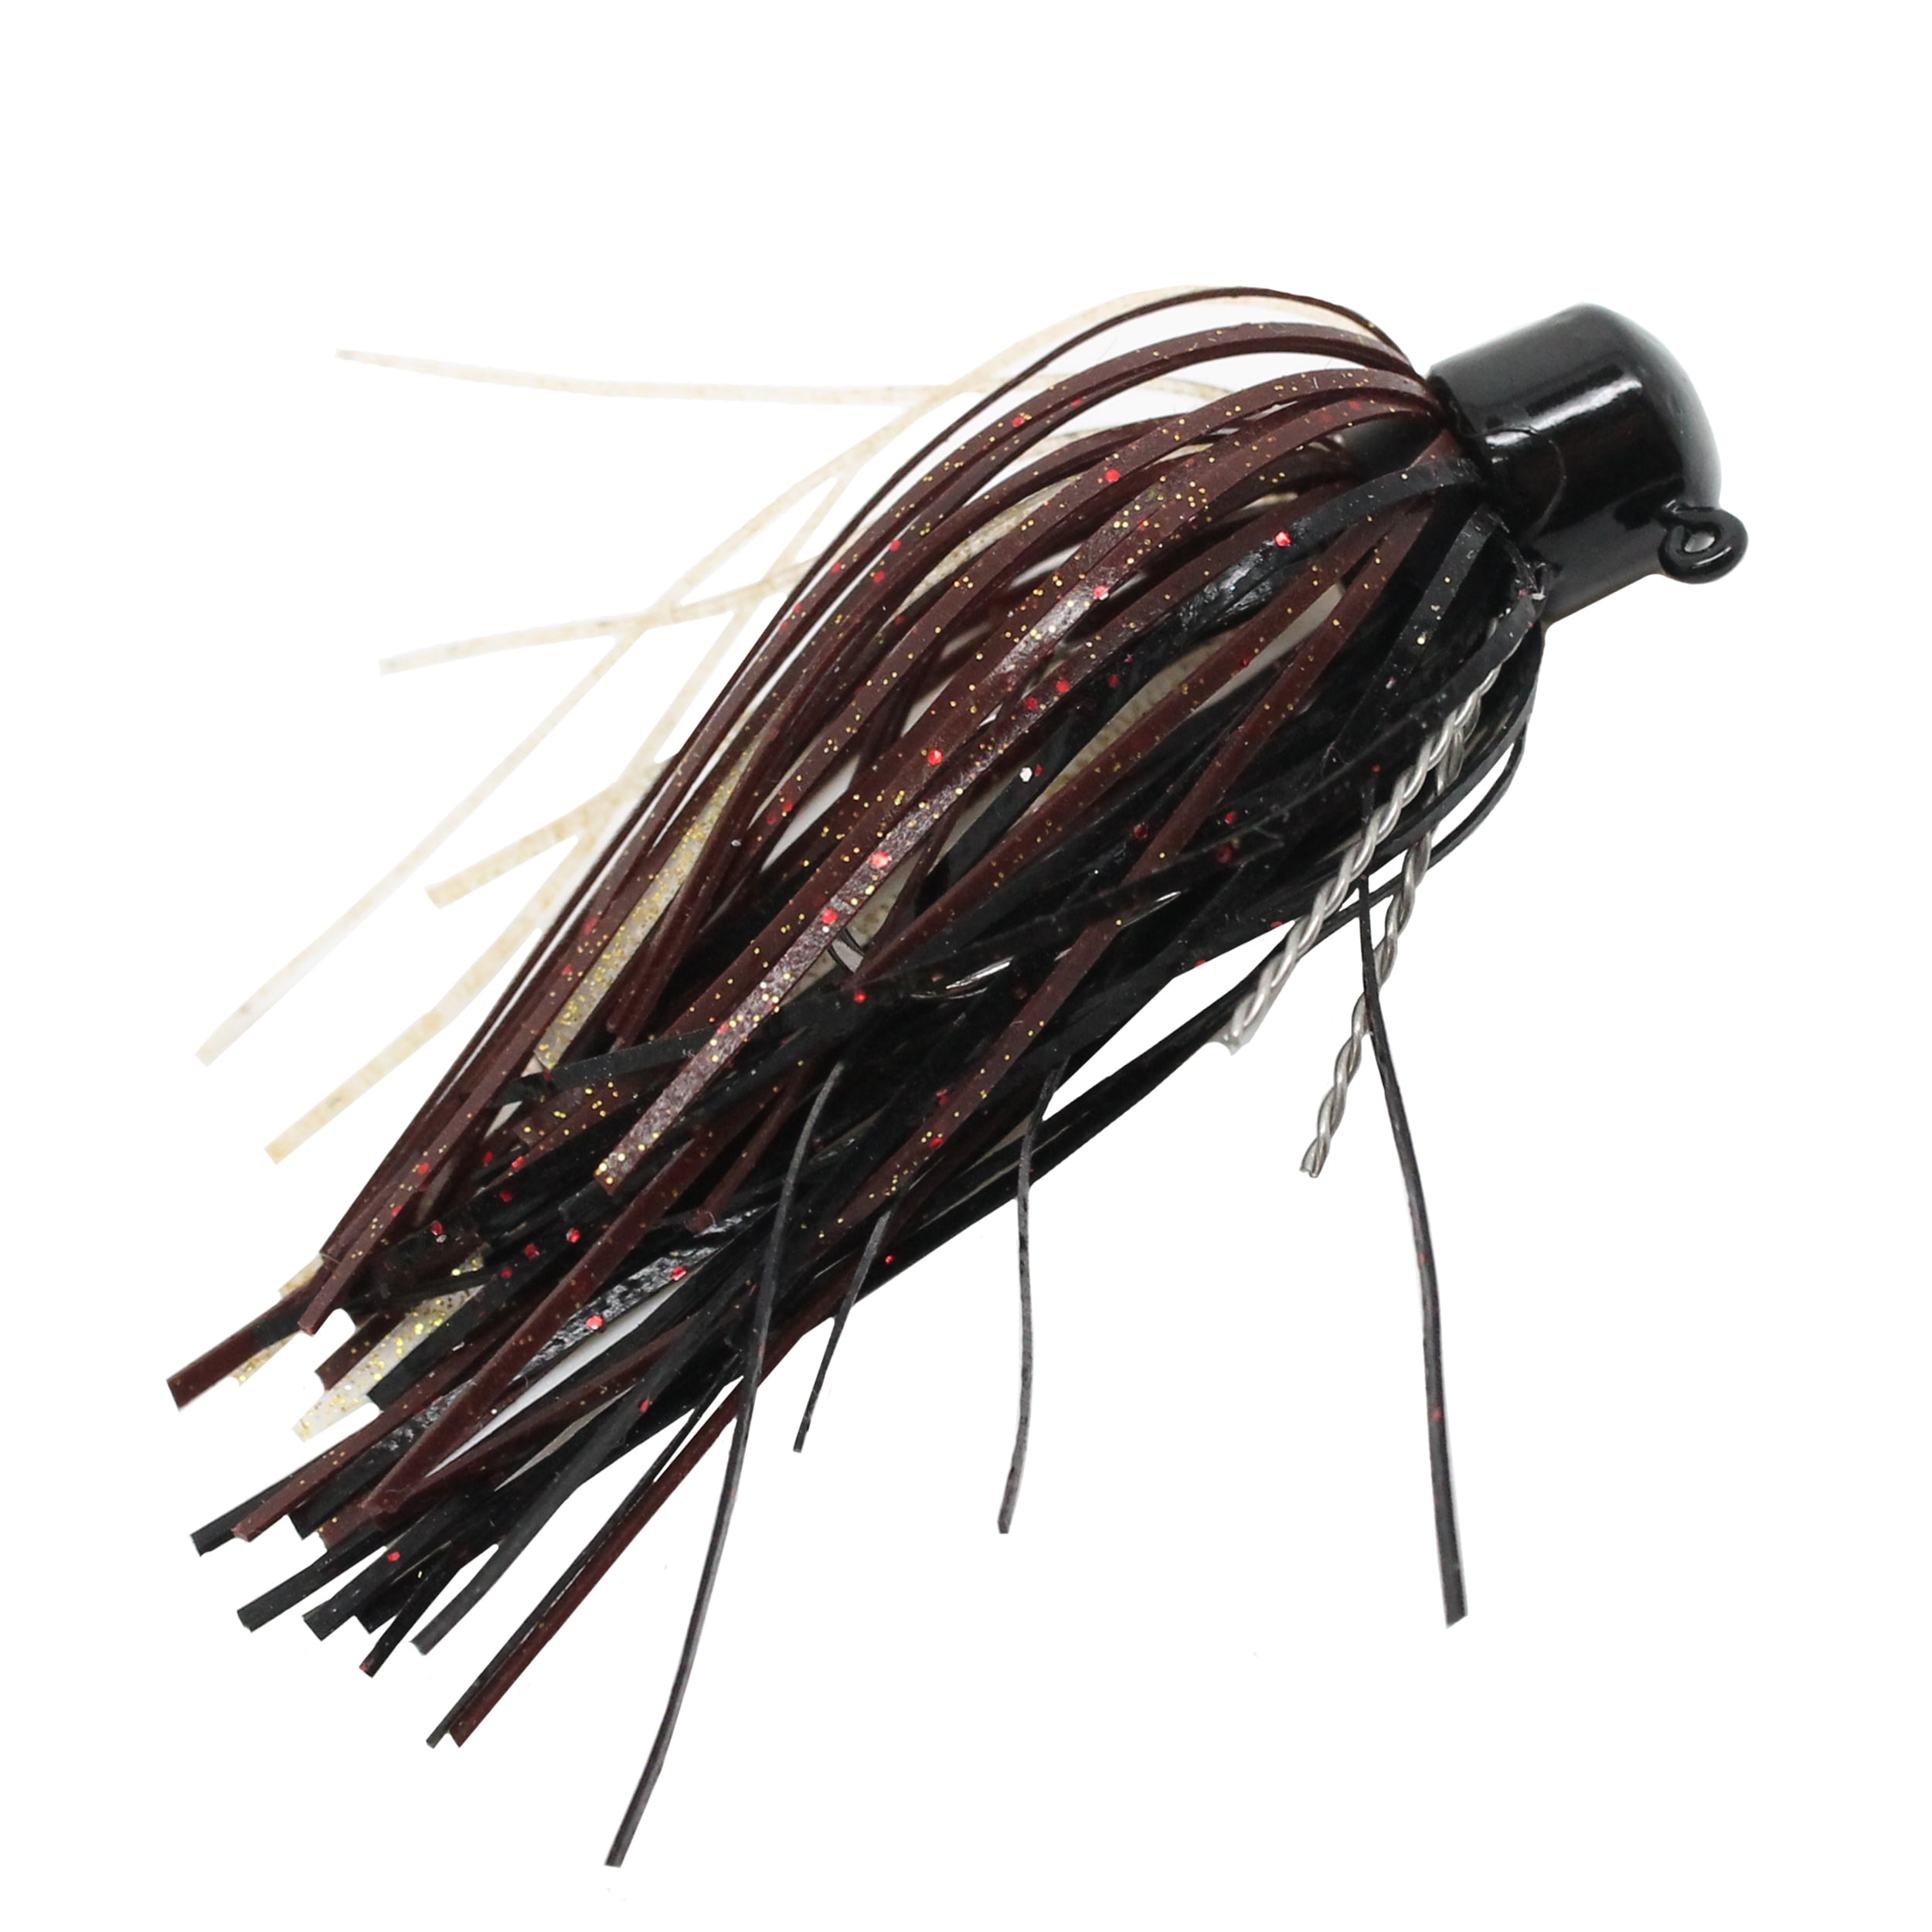 Z-man Finesse Shroomz Micro Jig Lures 